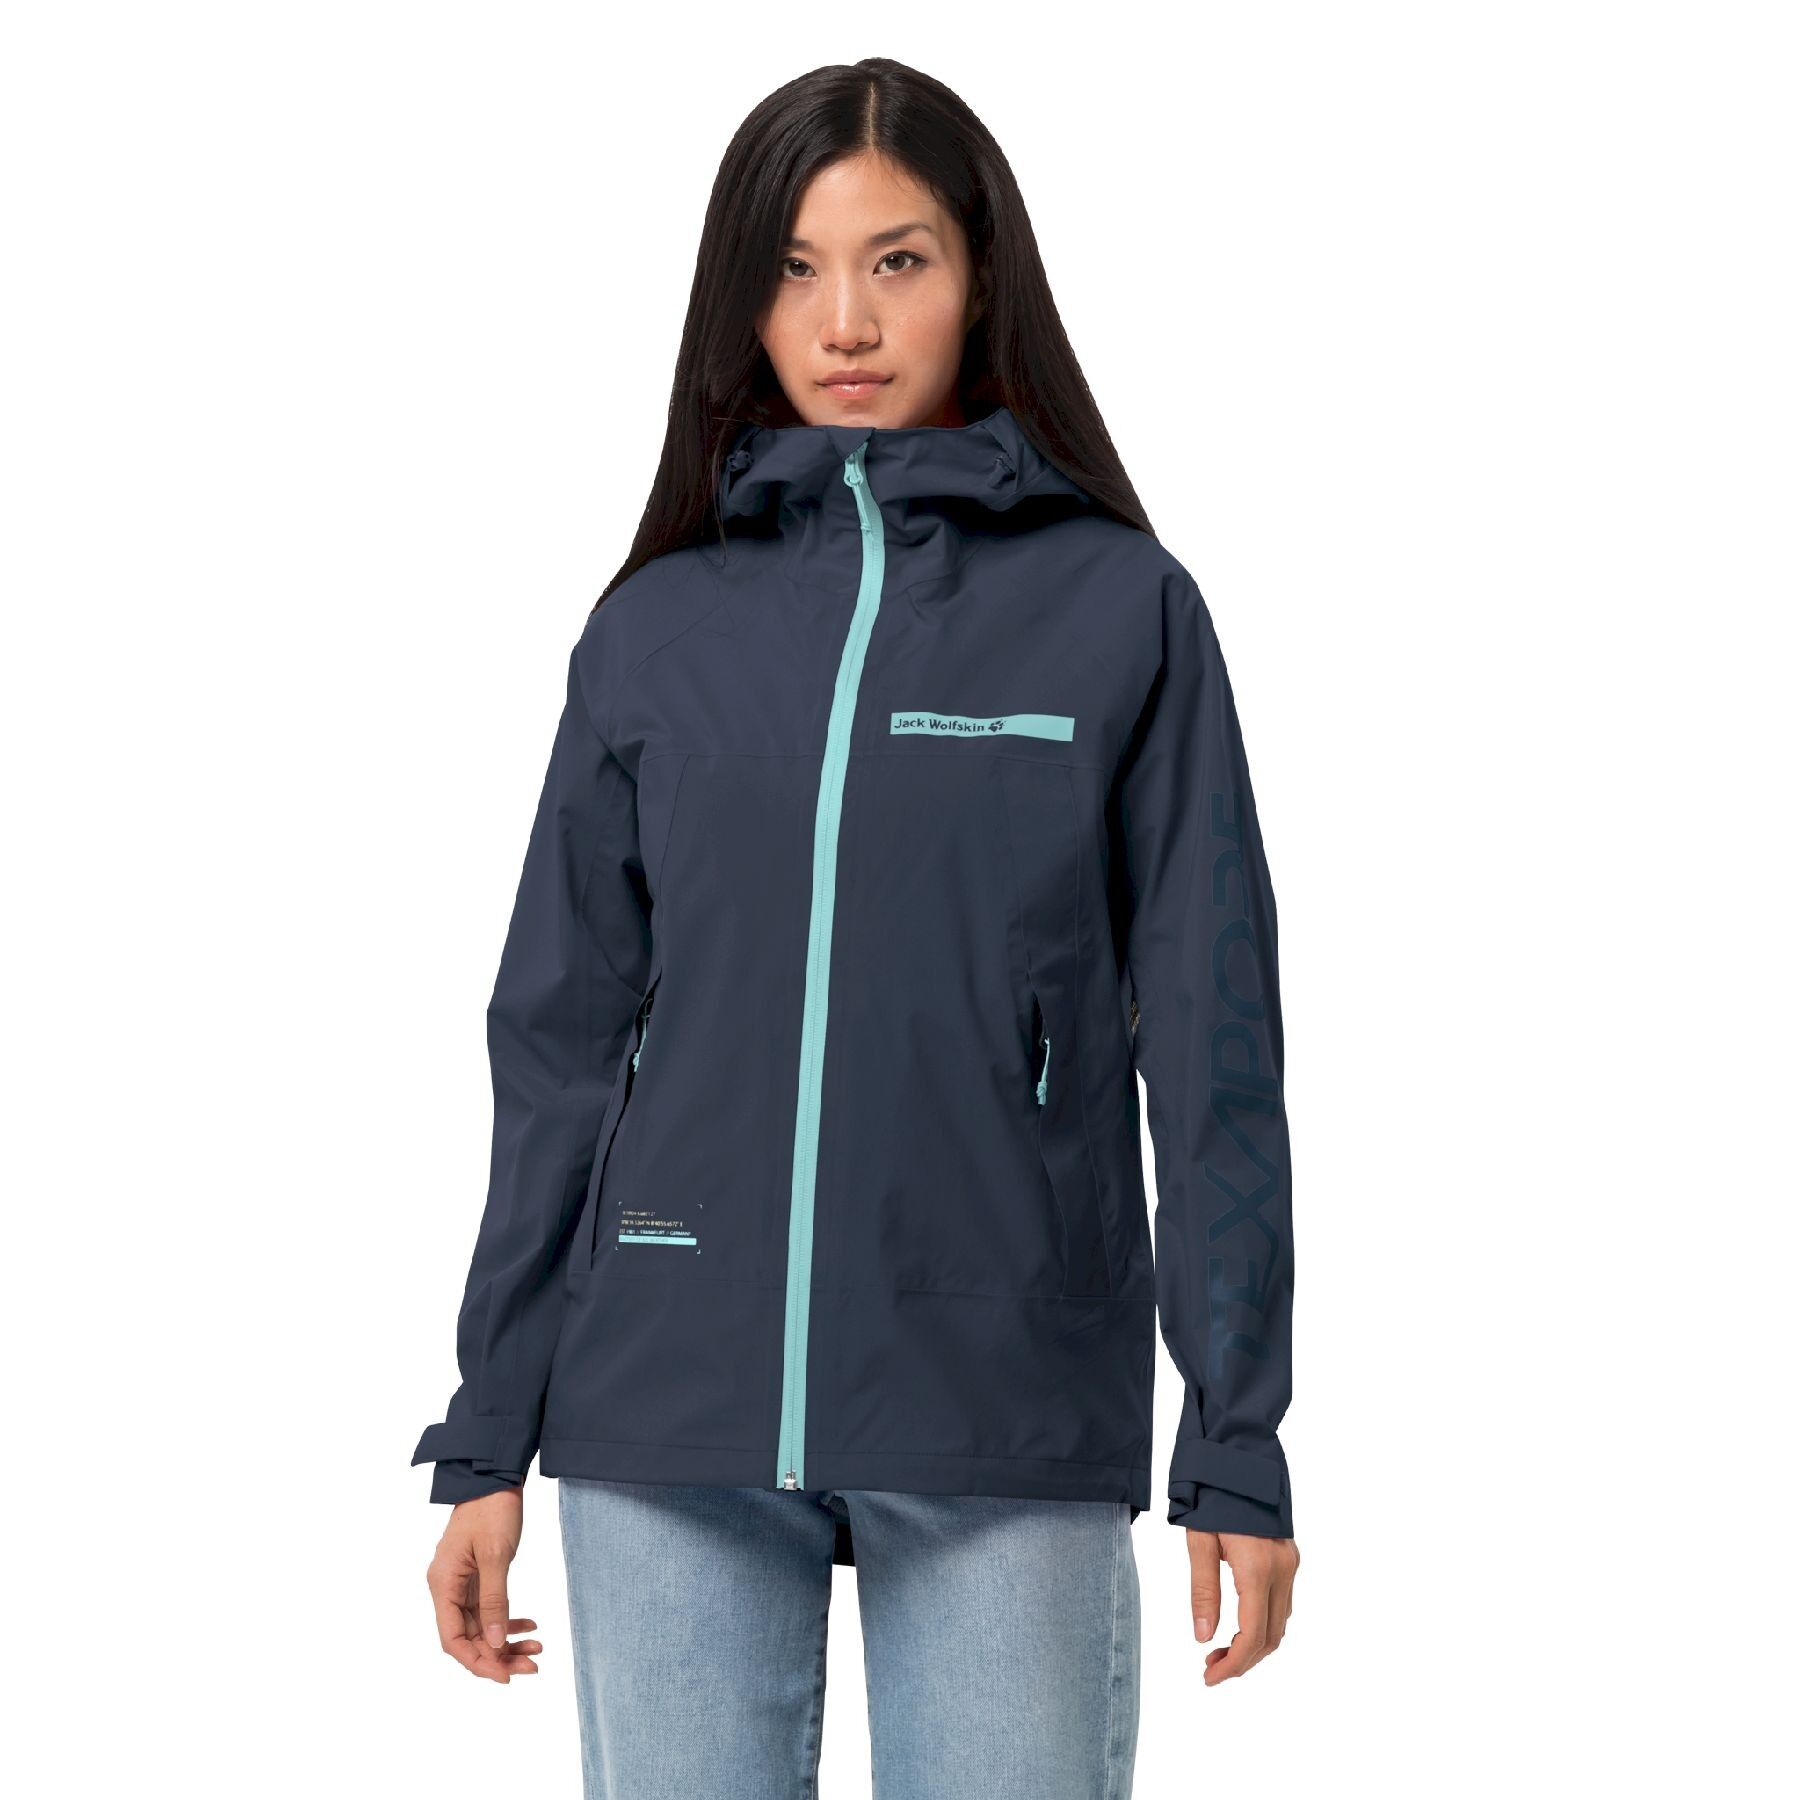 Jack Wolfskin Offshore Jacket - Chaqueta impermeable - Mujer